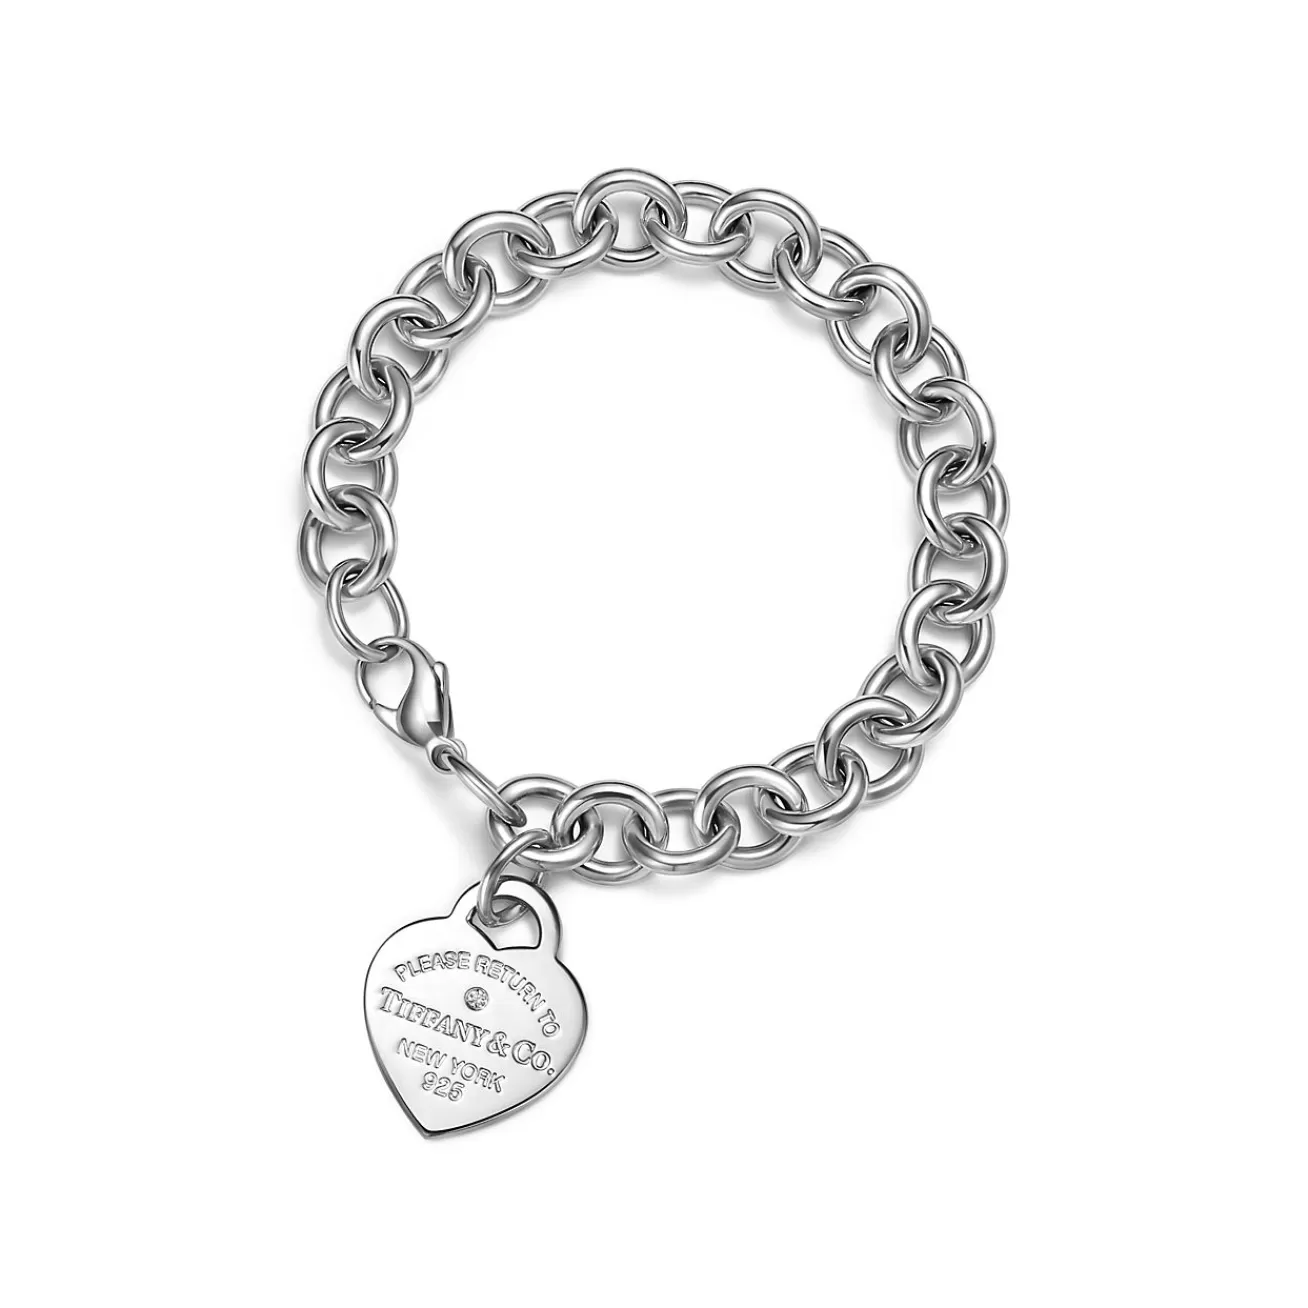 Tiffany & Co. Return to Tiffany® Heart Tag Bracelet in Sterling Silver with a Diamond, Medium | ^ Bracelets | Sterling Silver Jewelry